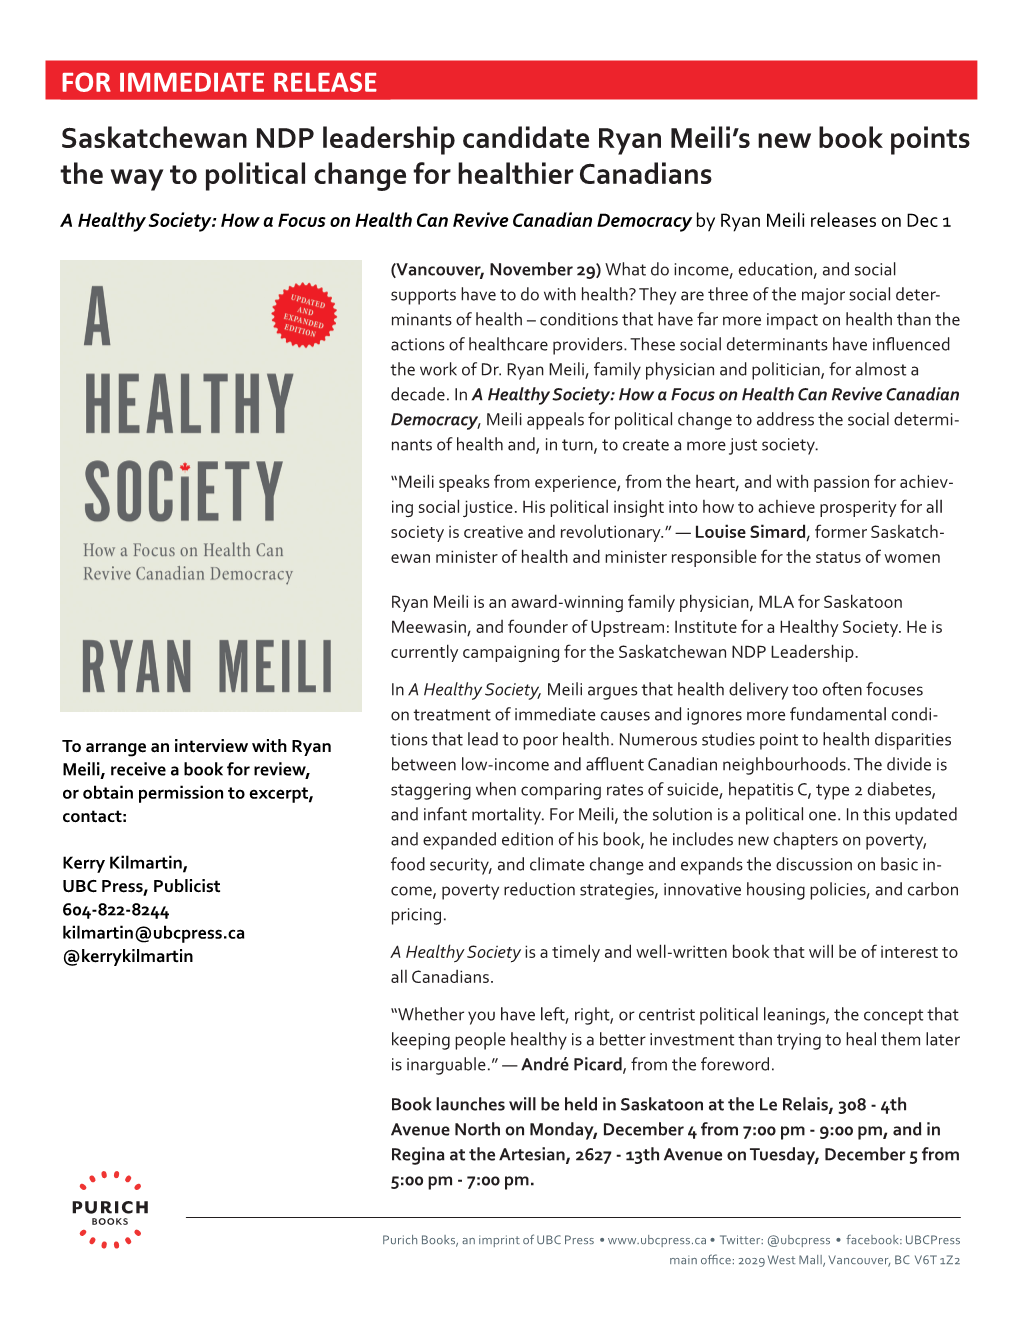 FOR IMMEDIATE RELEASE Saskatchewan NDP Leadership Candidate Ryan Meili’S New Book Points the Way to Political Change for Healthier Canadians